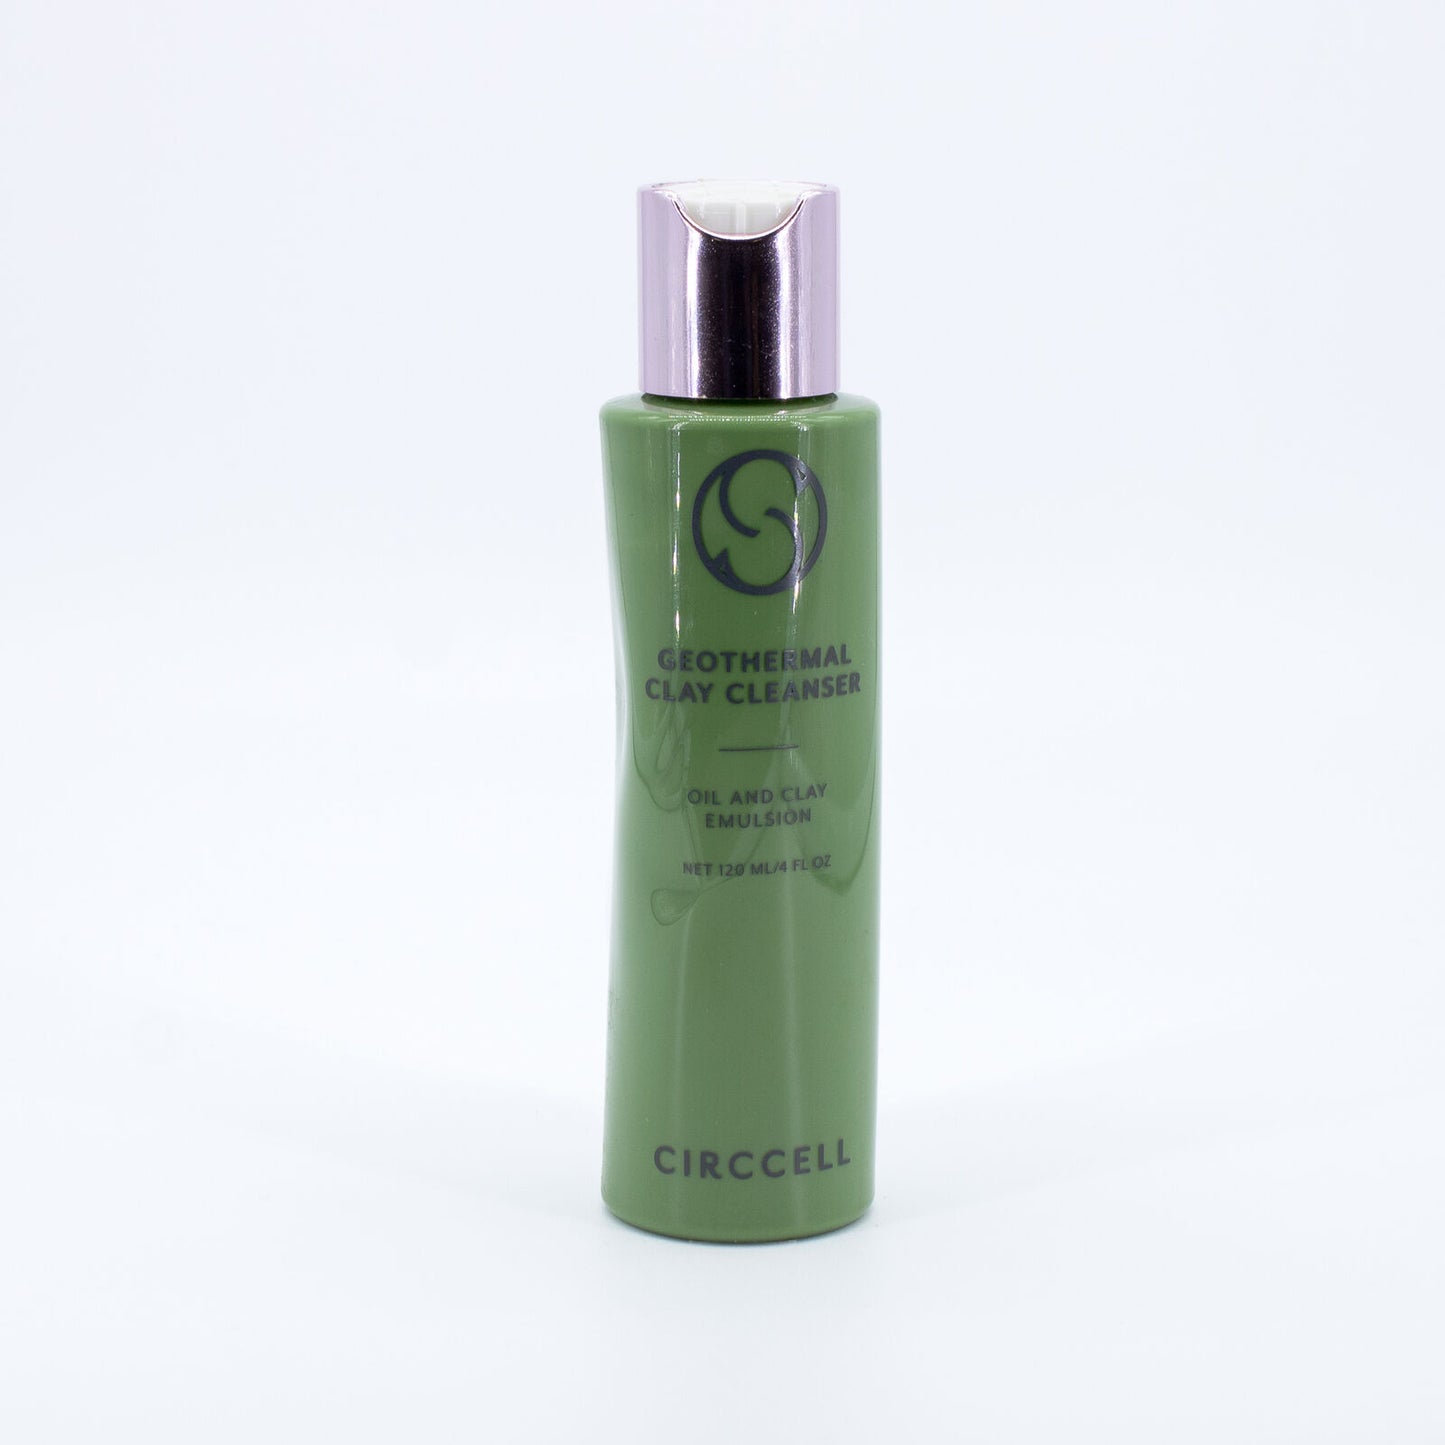 CIRCCELL Geothermal Clay Cleanser Oil and Clay Emulsion 4oz - Imperfect Conta...